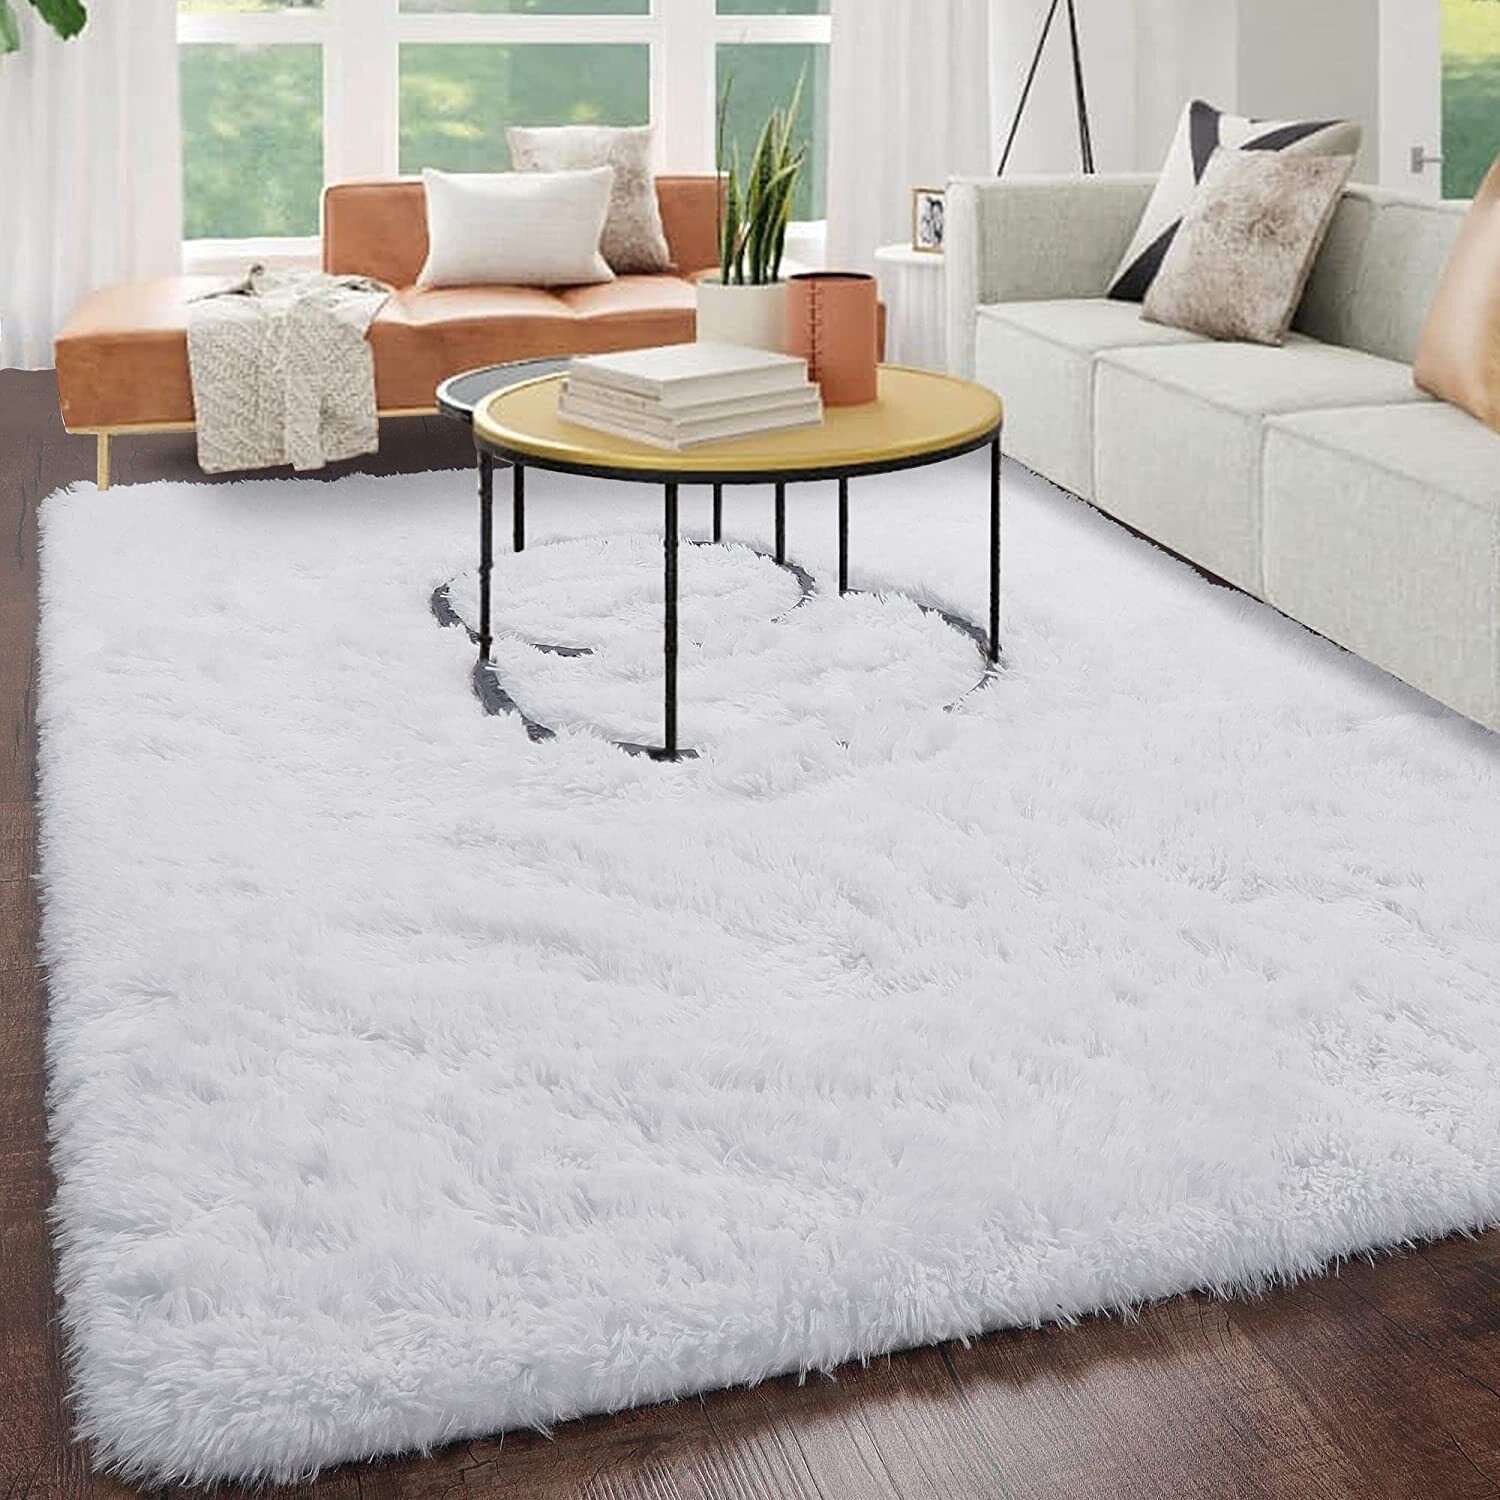 White Rugs For Bedroom,5x8 Rug,soft Fluffy Area Rugs For Living Room,white  Carpe 313051442430 | Ebay Within White Soft Rugs (View 13 of 15)